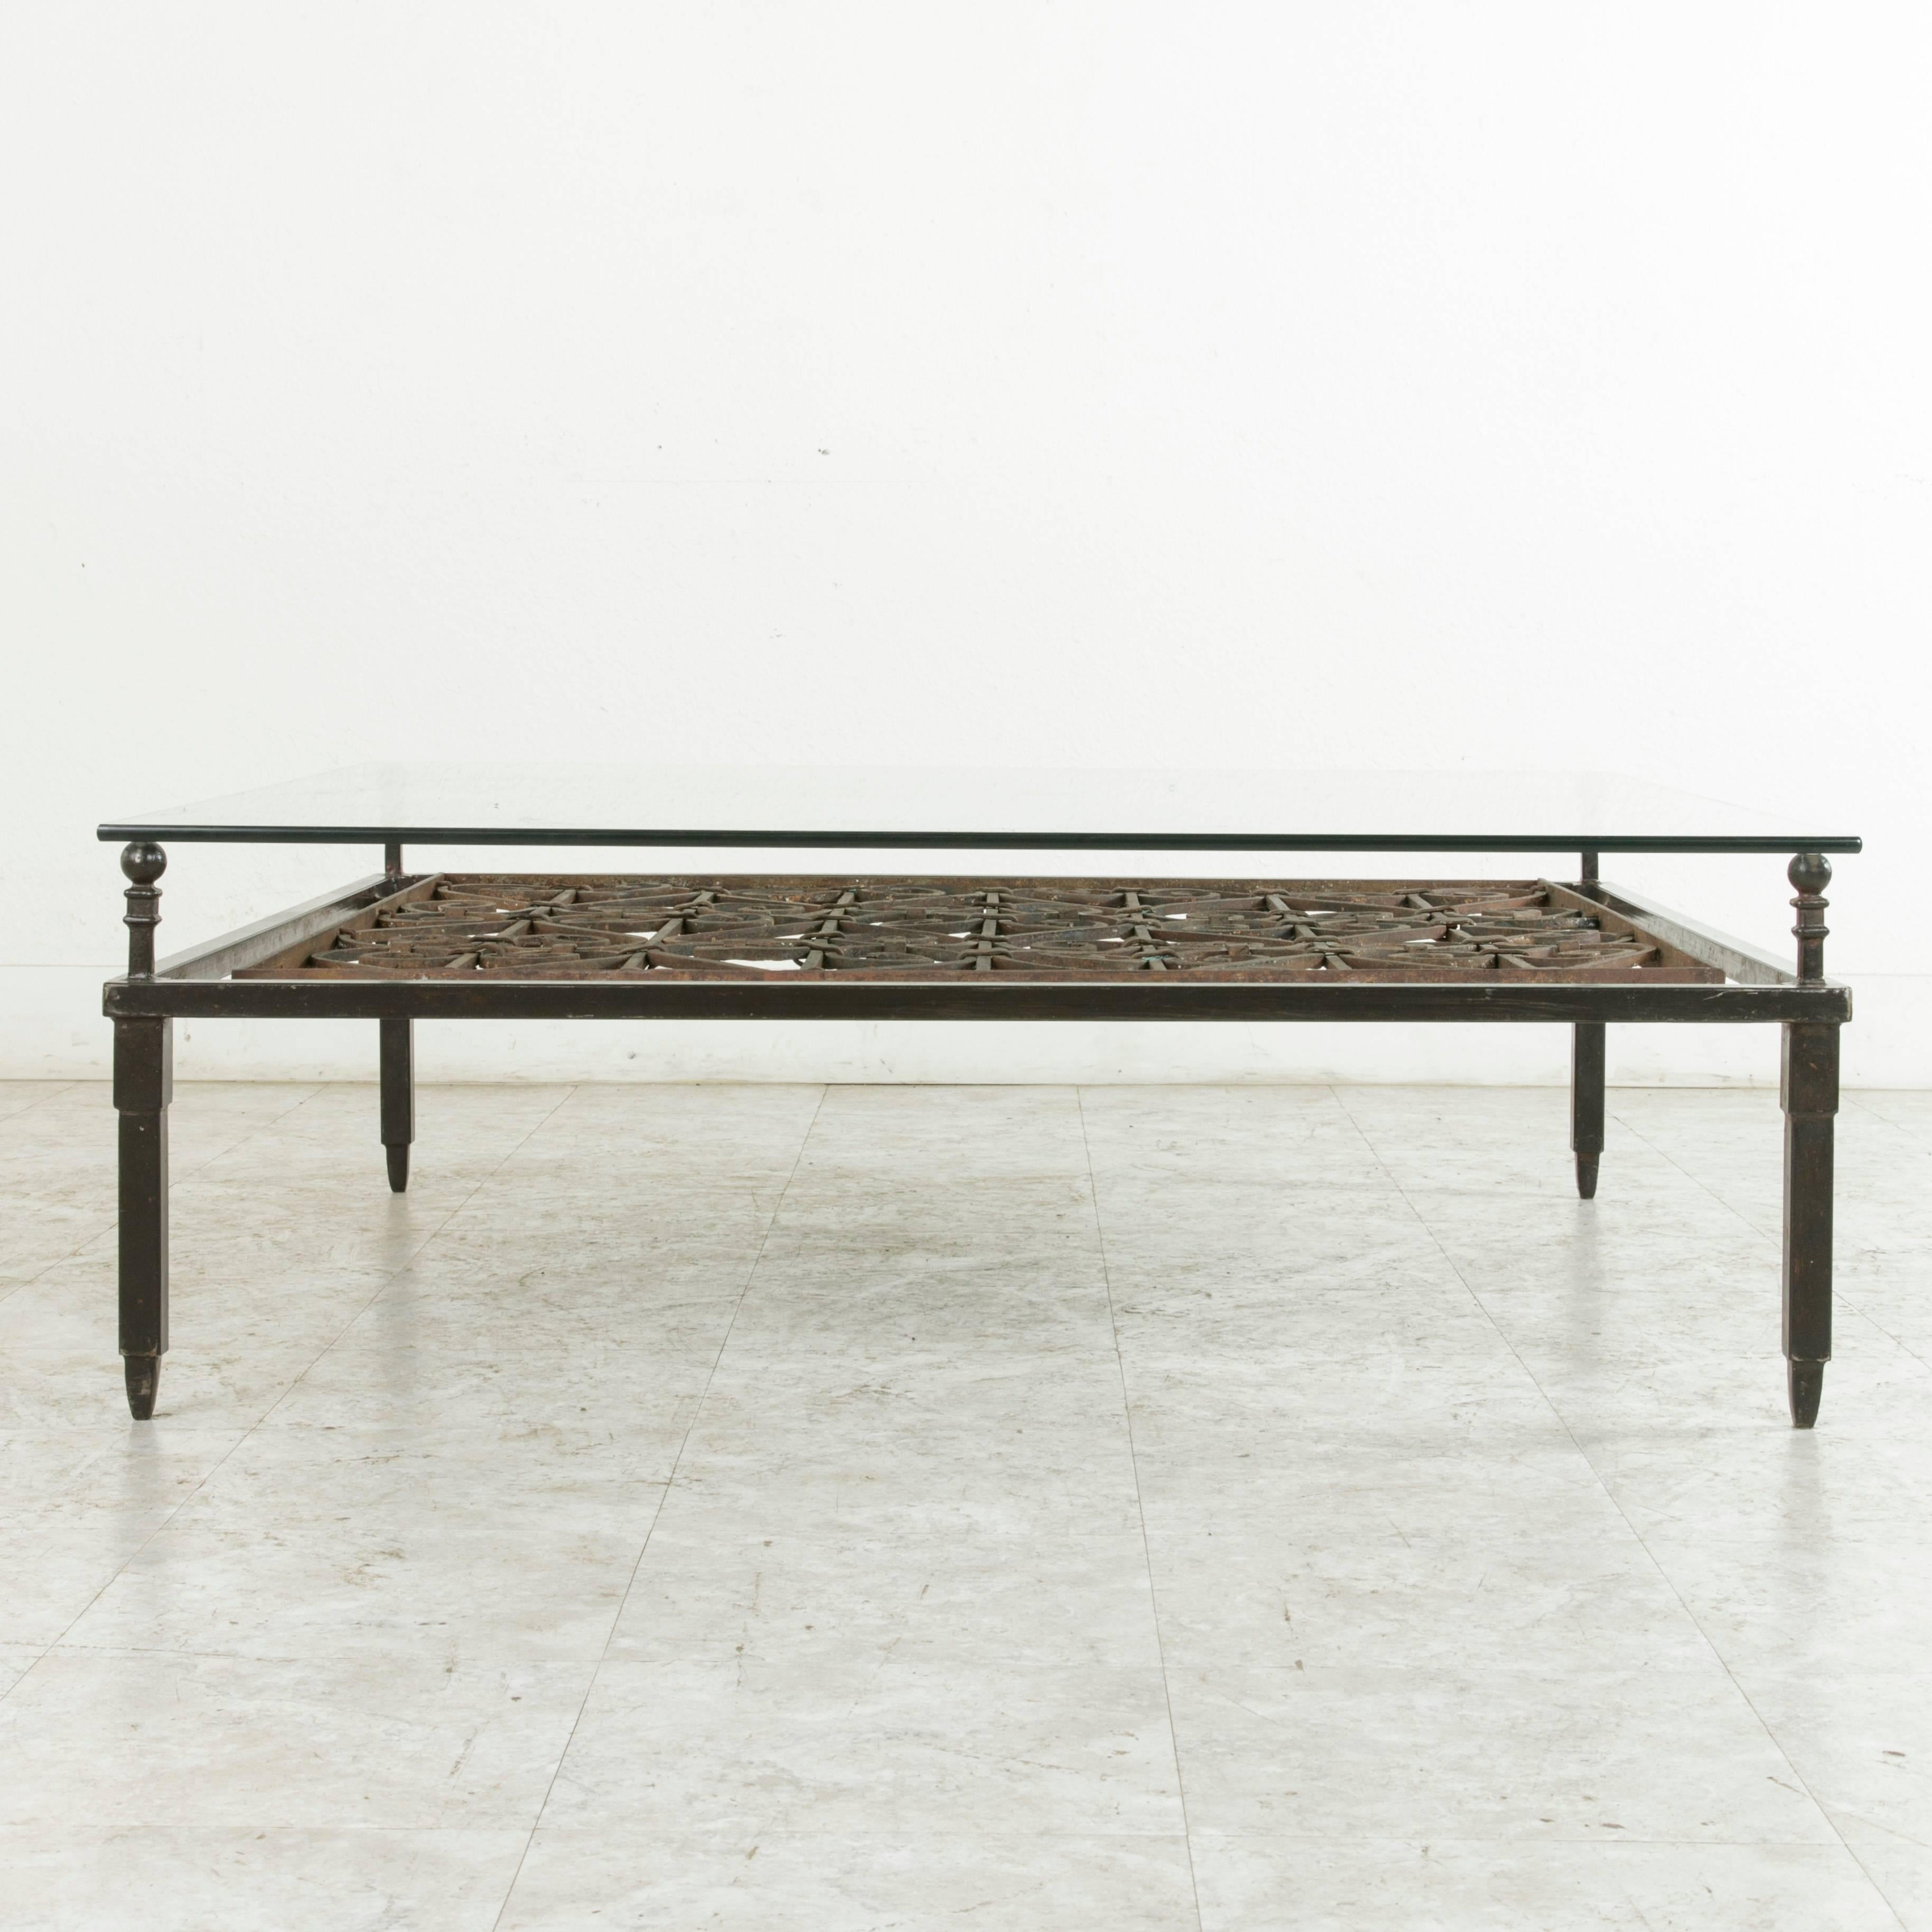 18th Century and Earlier Large 18th Century Forged Iron Grill Converted into Coffee Table with Glass Top